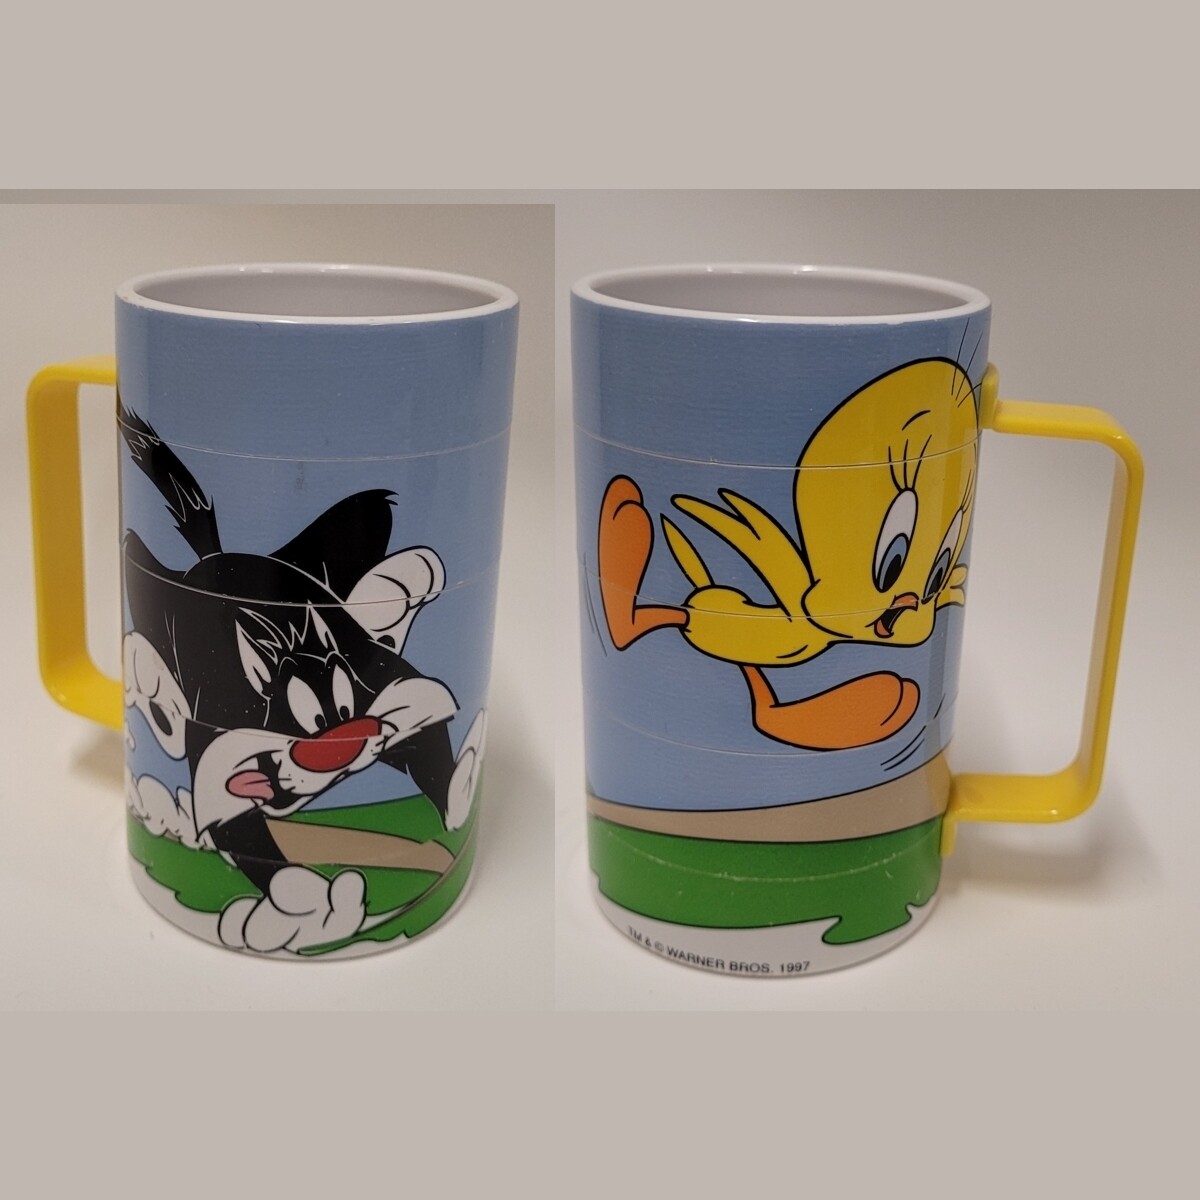 Sylvester and Tweety Plastic Puzzle Mug/Cup - 1 unit